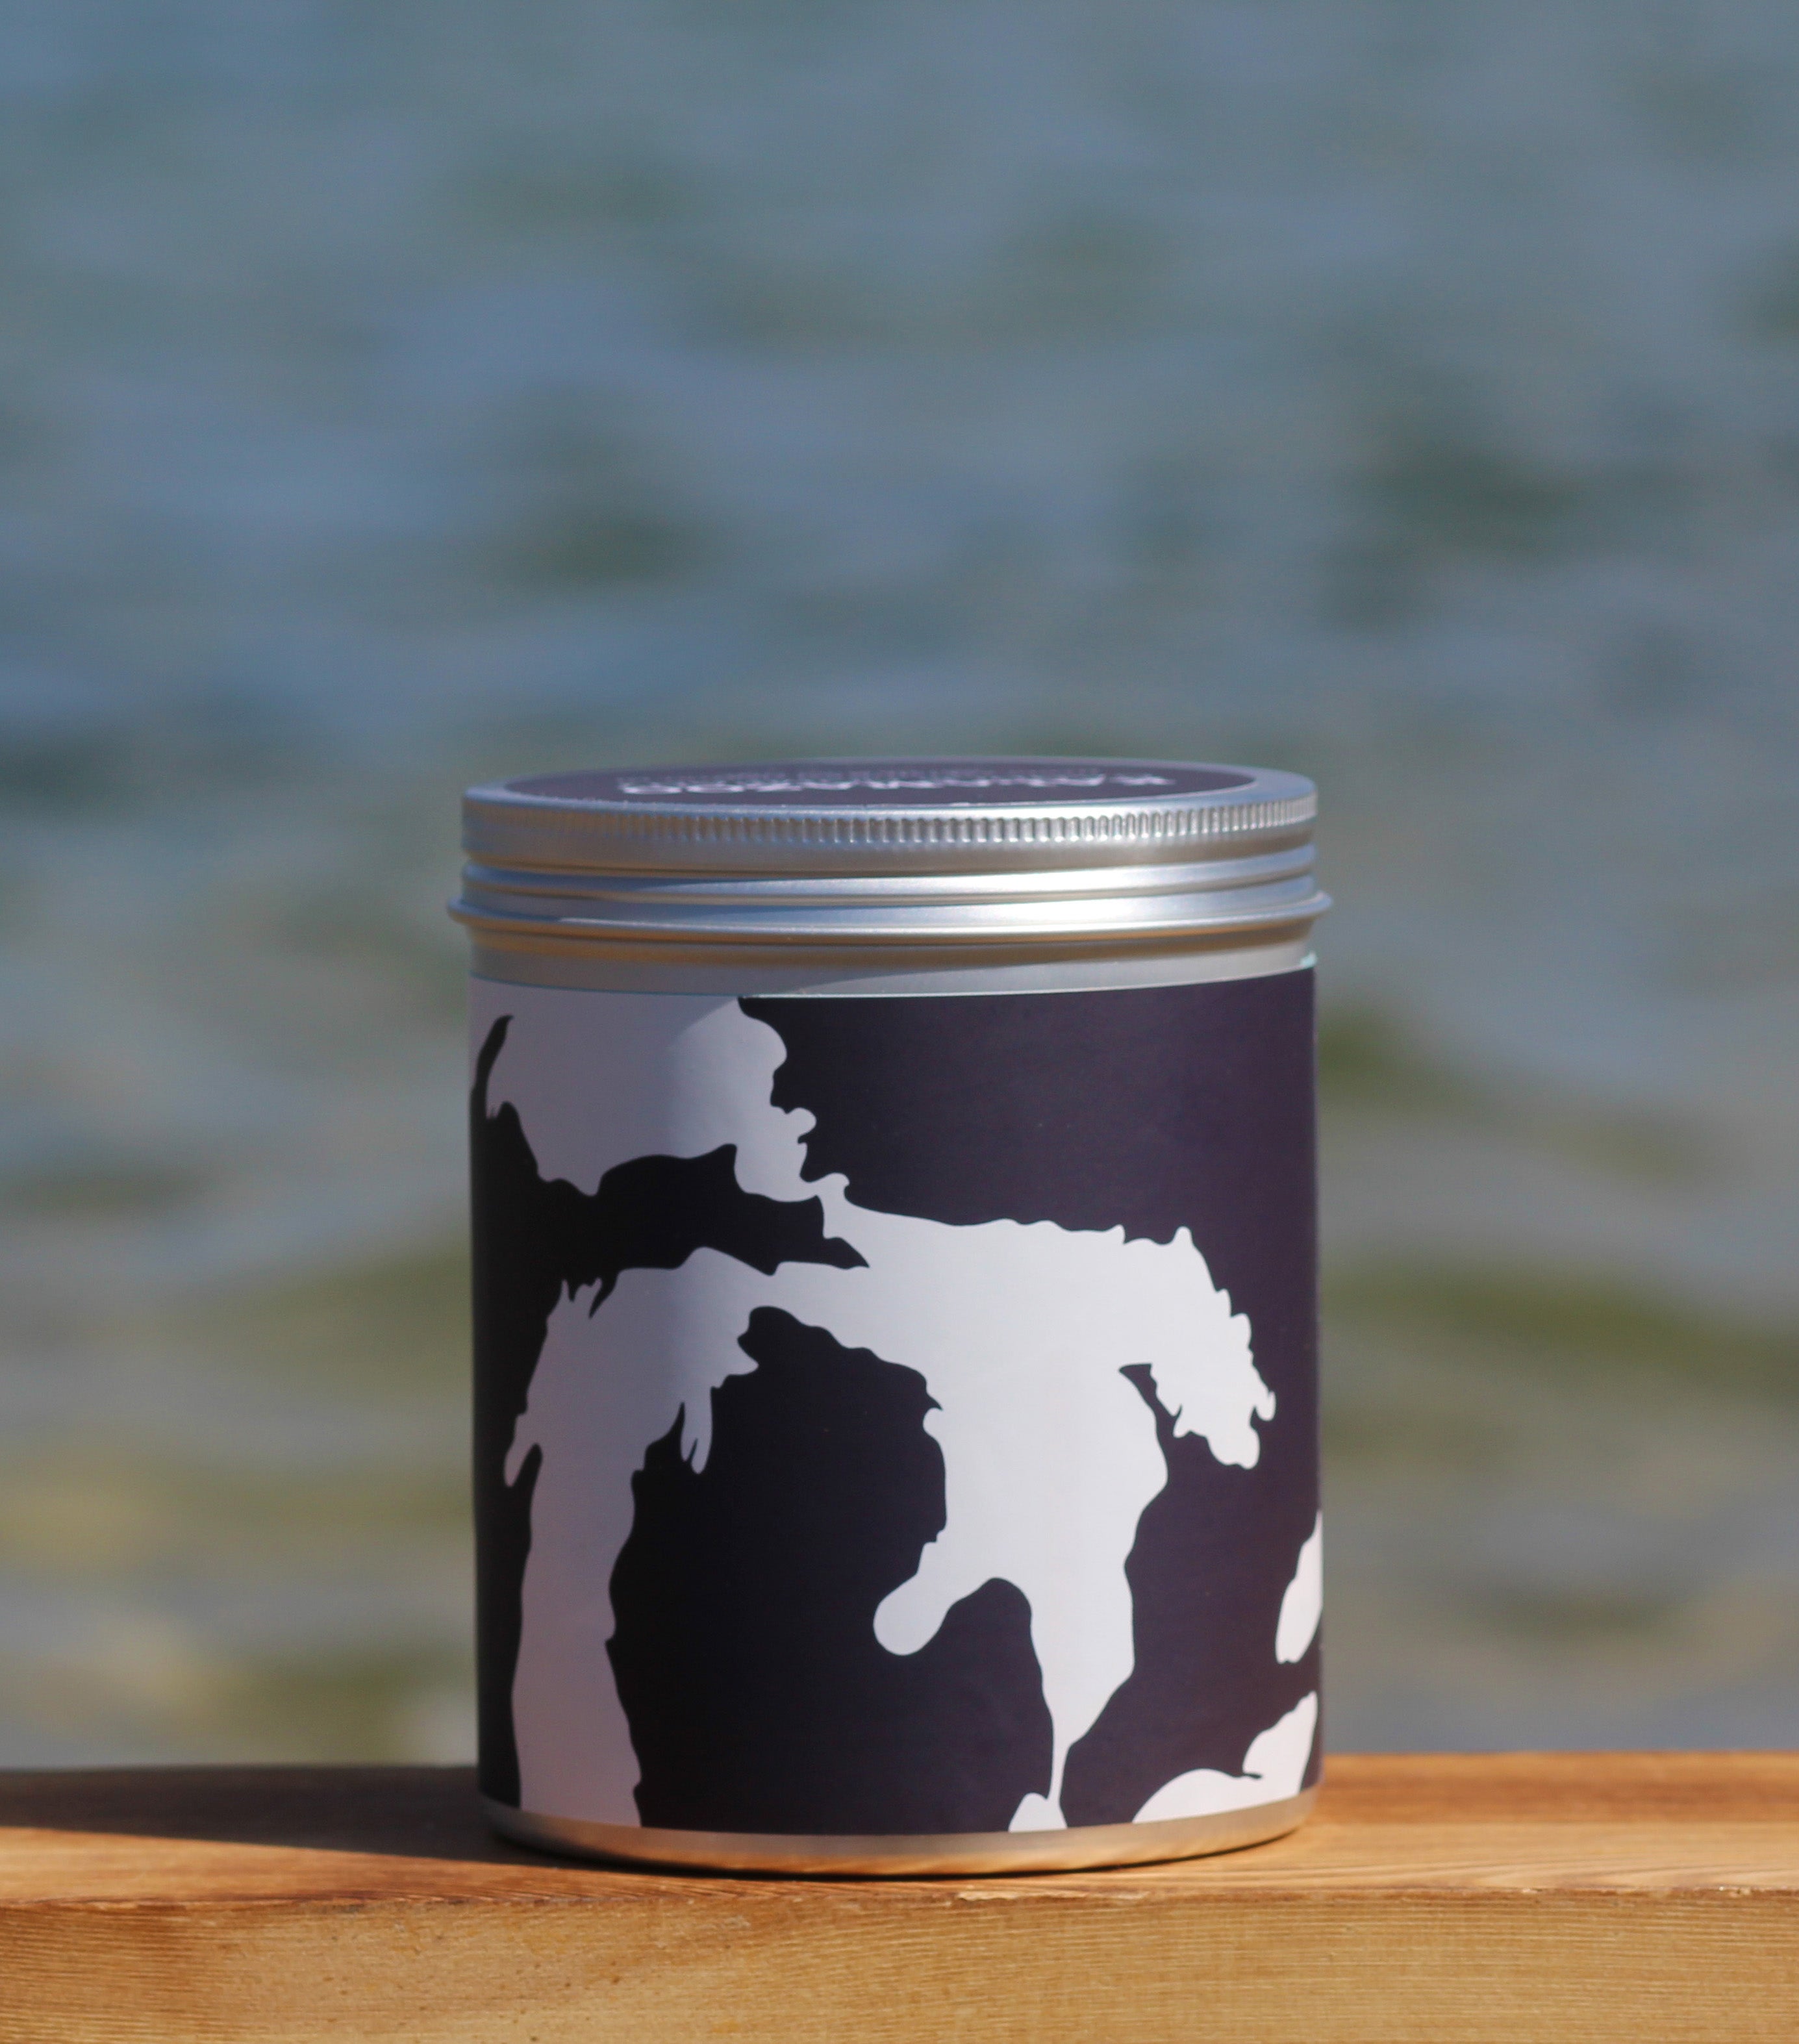 Light up your home with the Great Lakes Candle and do good too! For a limited time, $5 of each purchase is donated to the Alliance of the Great Lakes. The candle has a fresh and inviting fragrance of bergamot and sea salt. Illuminate and support!